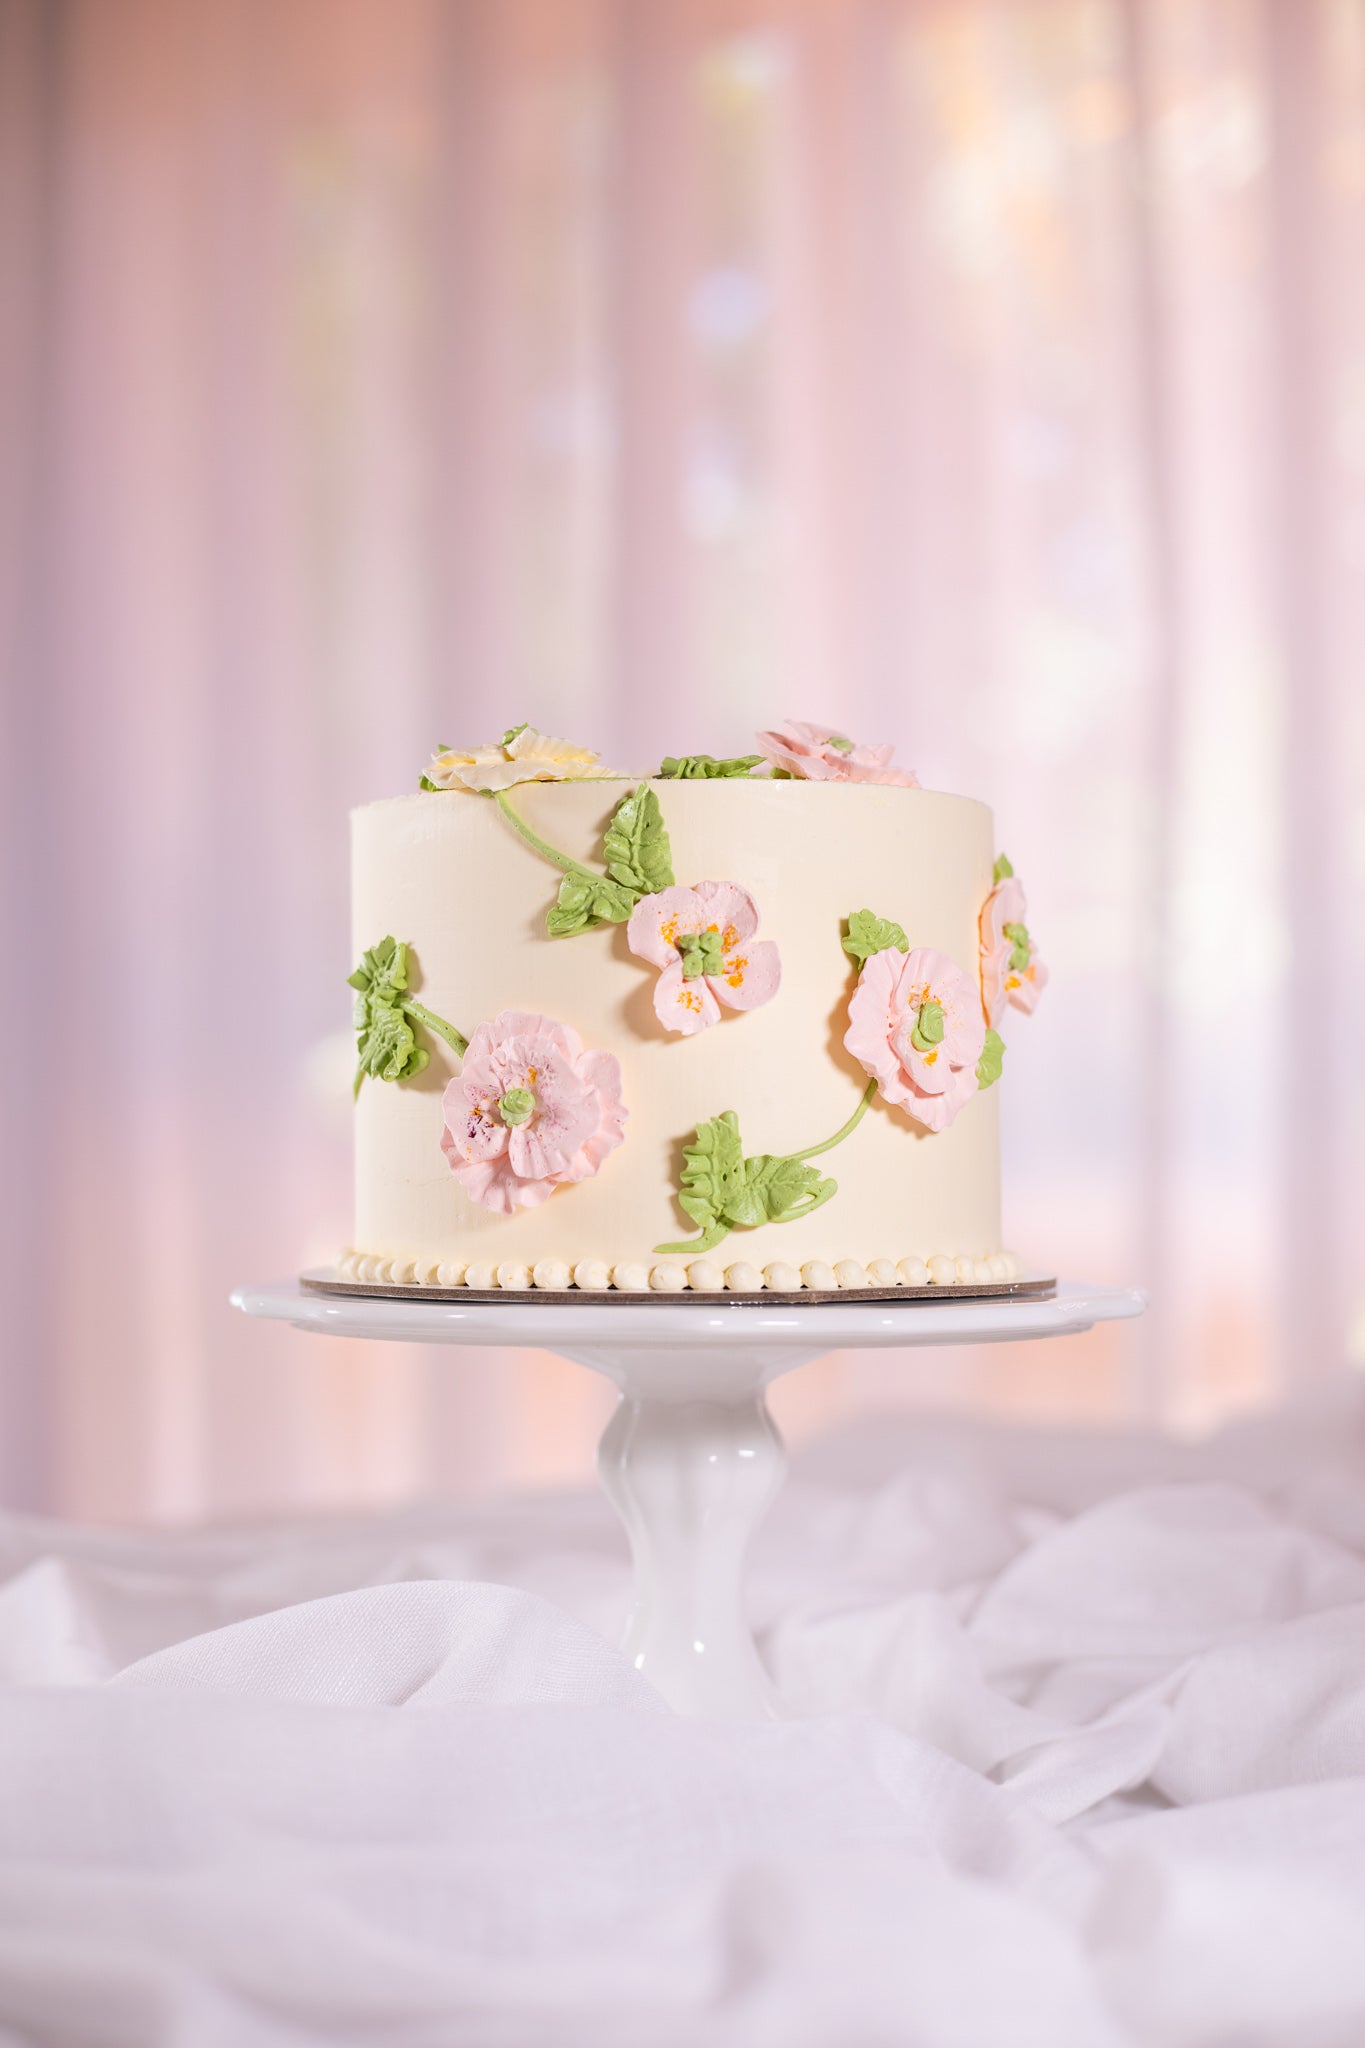 Buttercream cake with piped buttercream flowers and leaves - Sweet Passion Cakes Aus